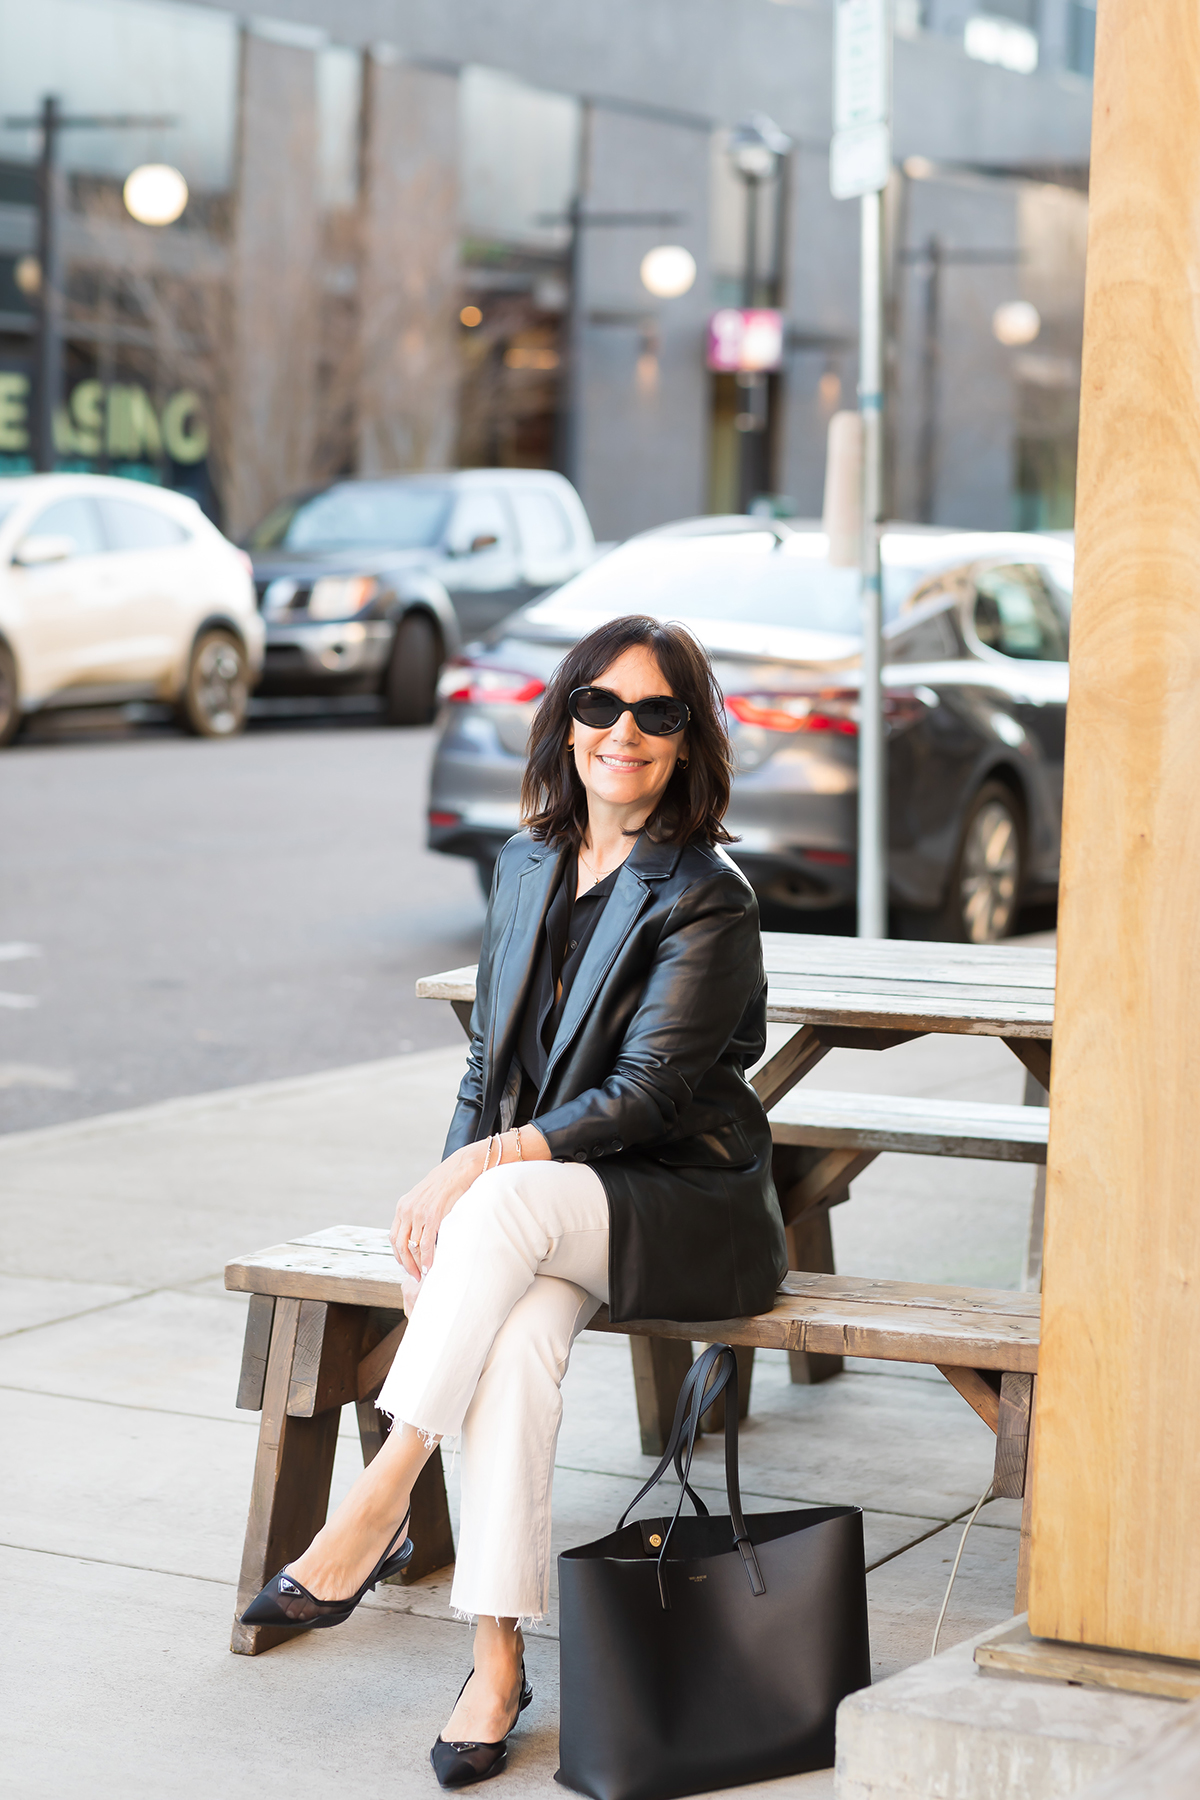 I'm a Former Nordstrom Buyer and Went Trend Shopping in NYC—I Loved These Items